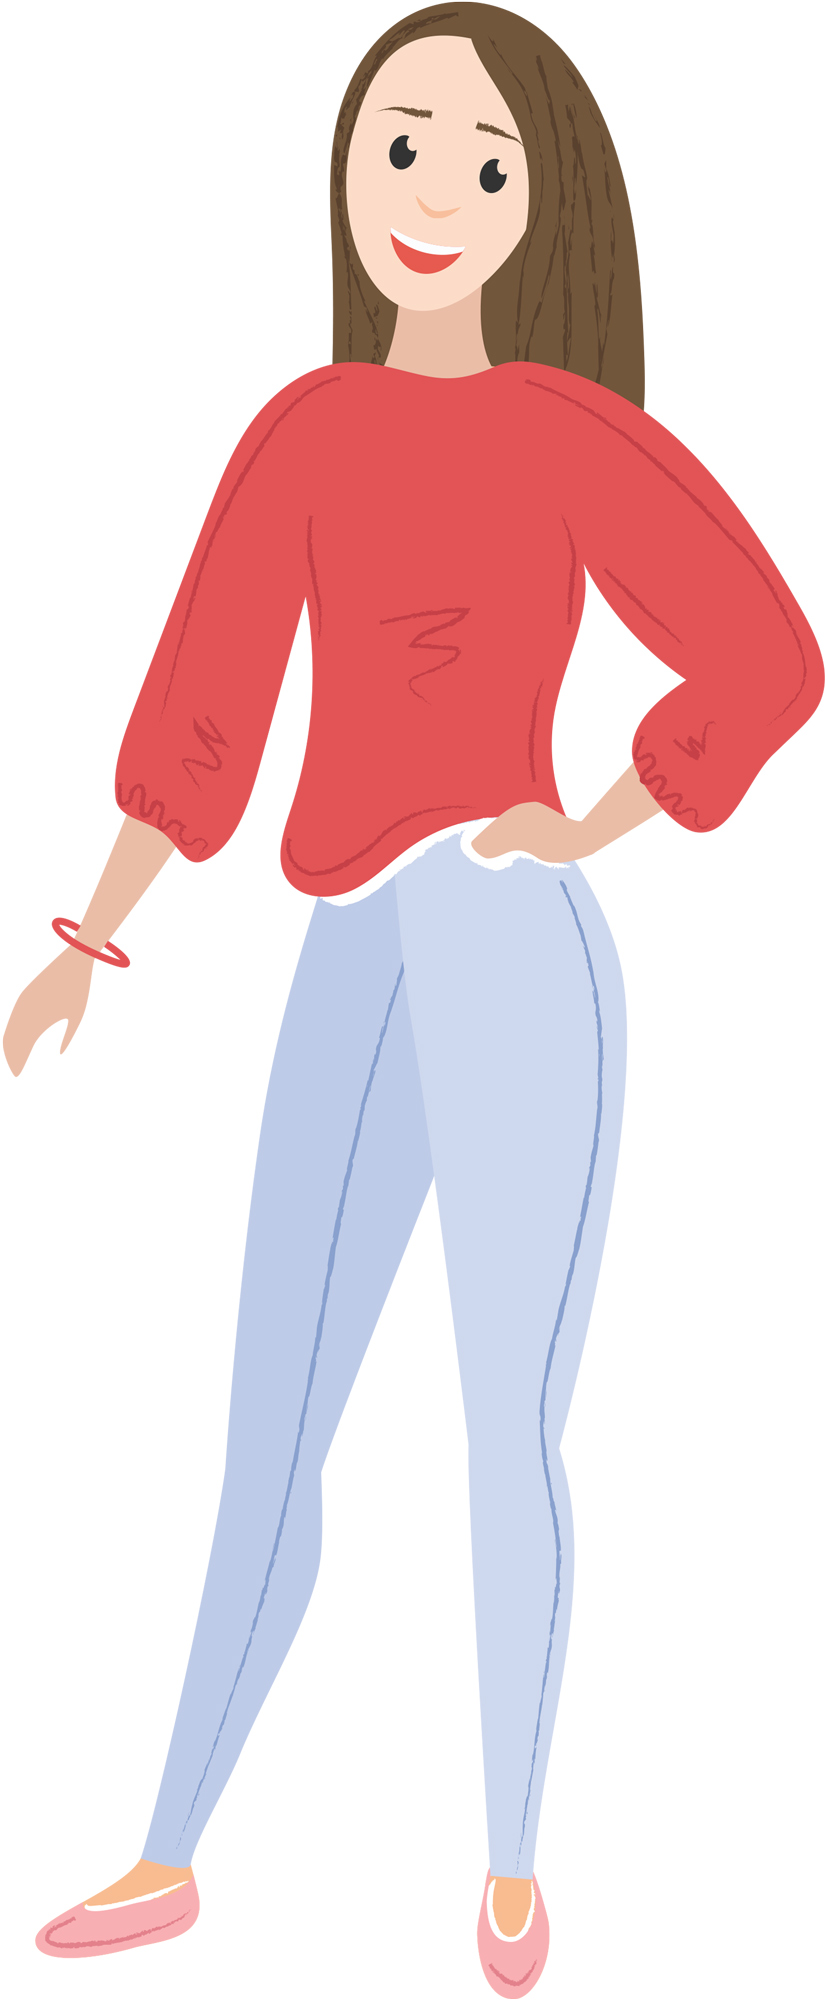 illustration of a woman wearing a red shirt and jeans with one hand on the hip